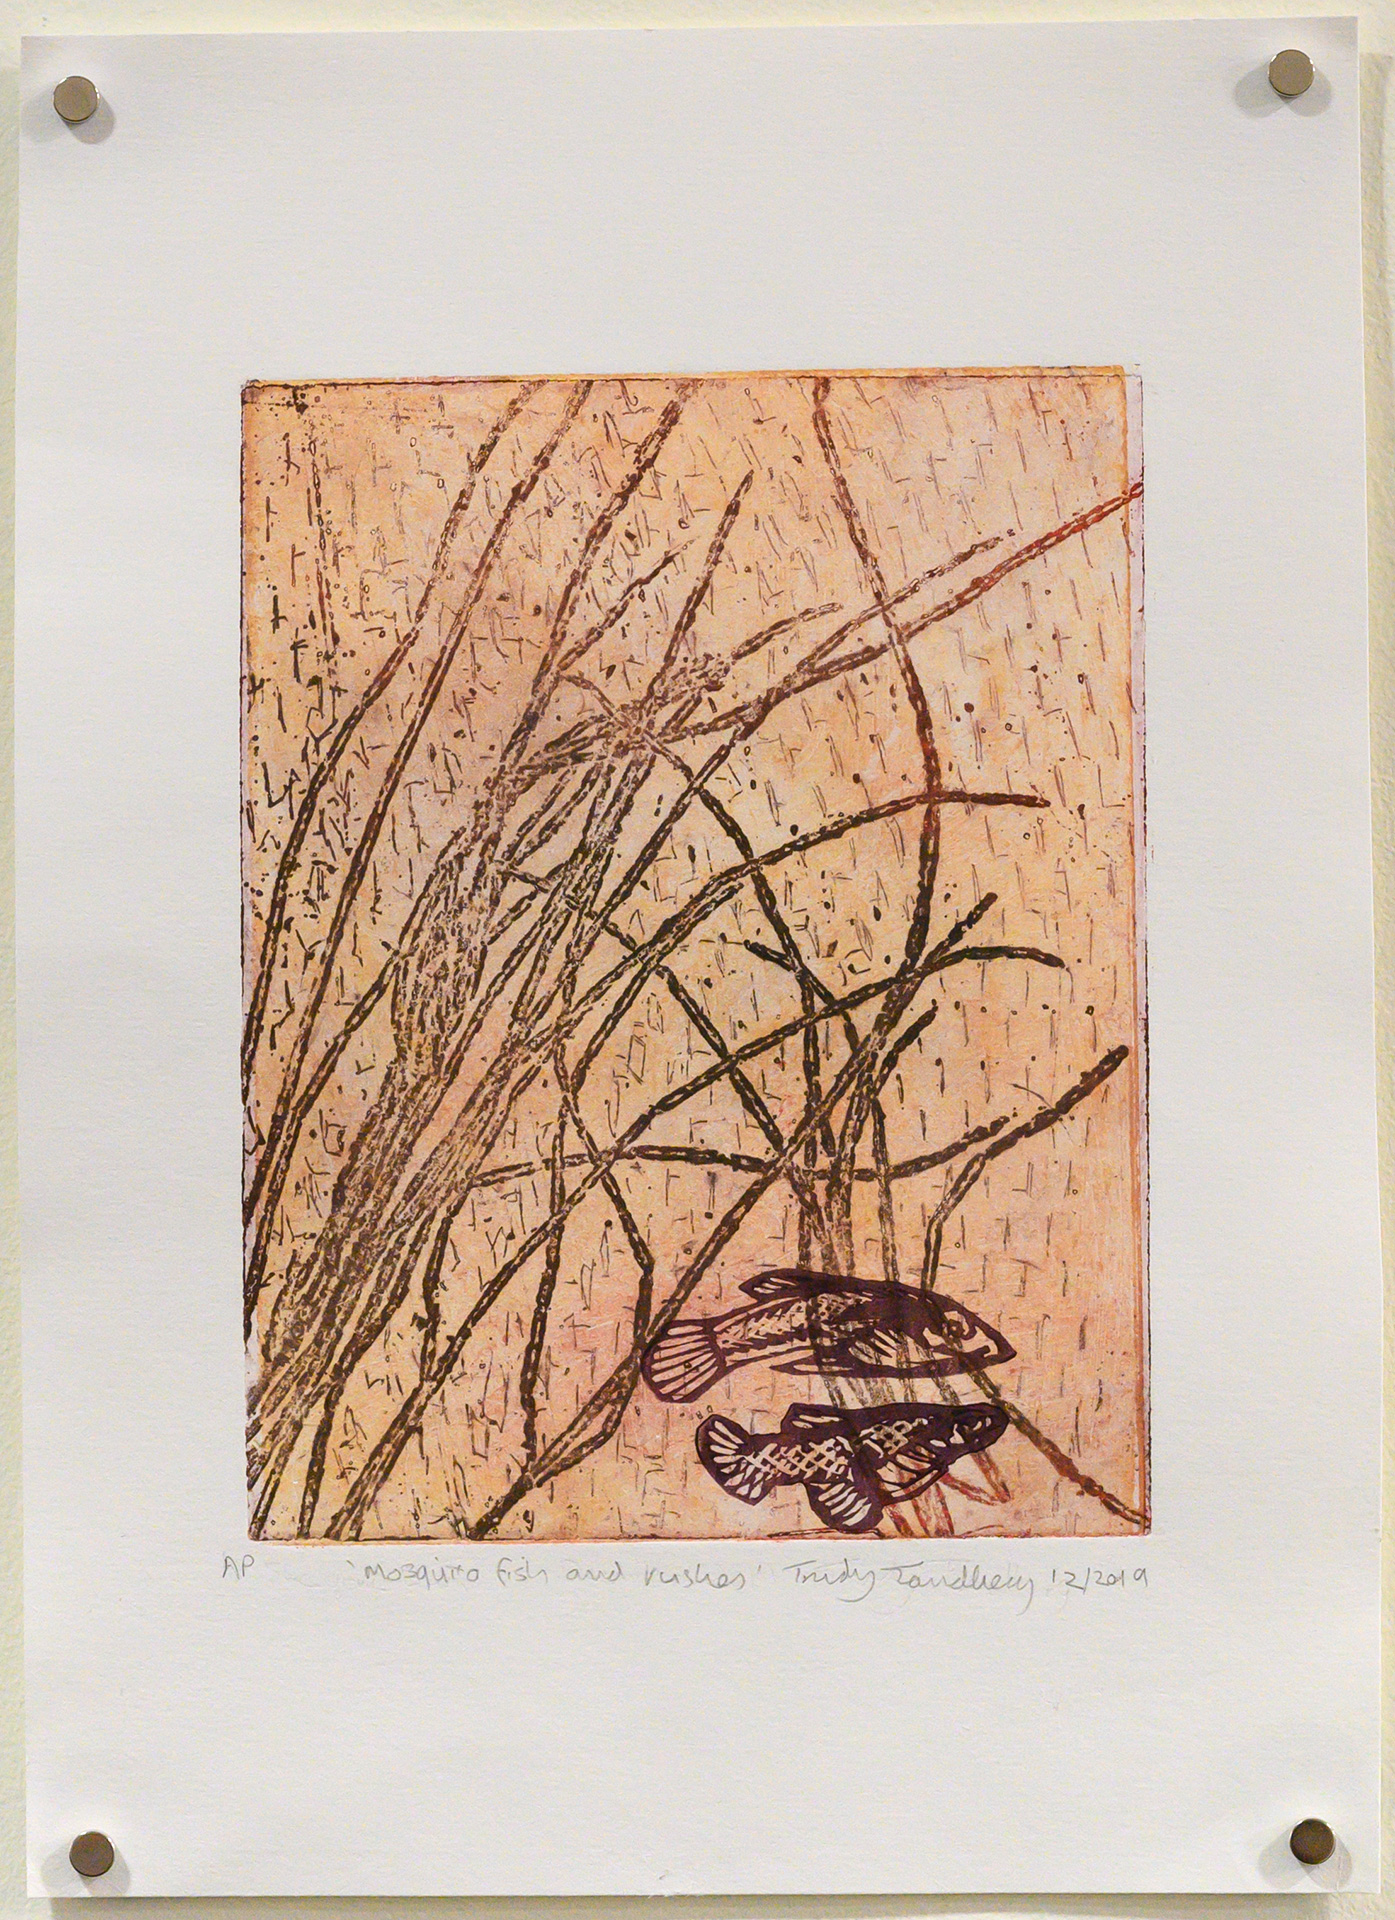 Unframed artwork by Trudy Tandberg of 2 small fish in rushes with light orange background